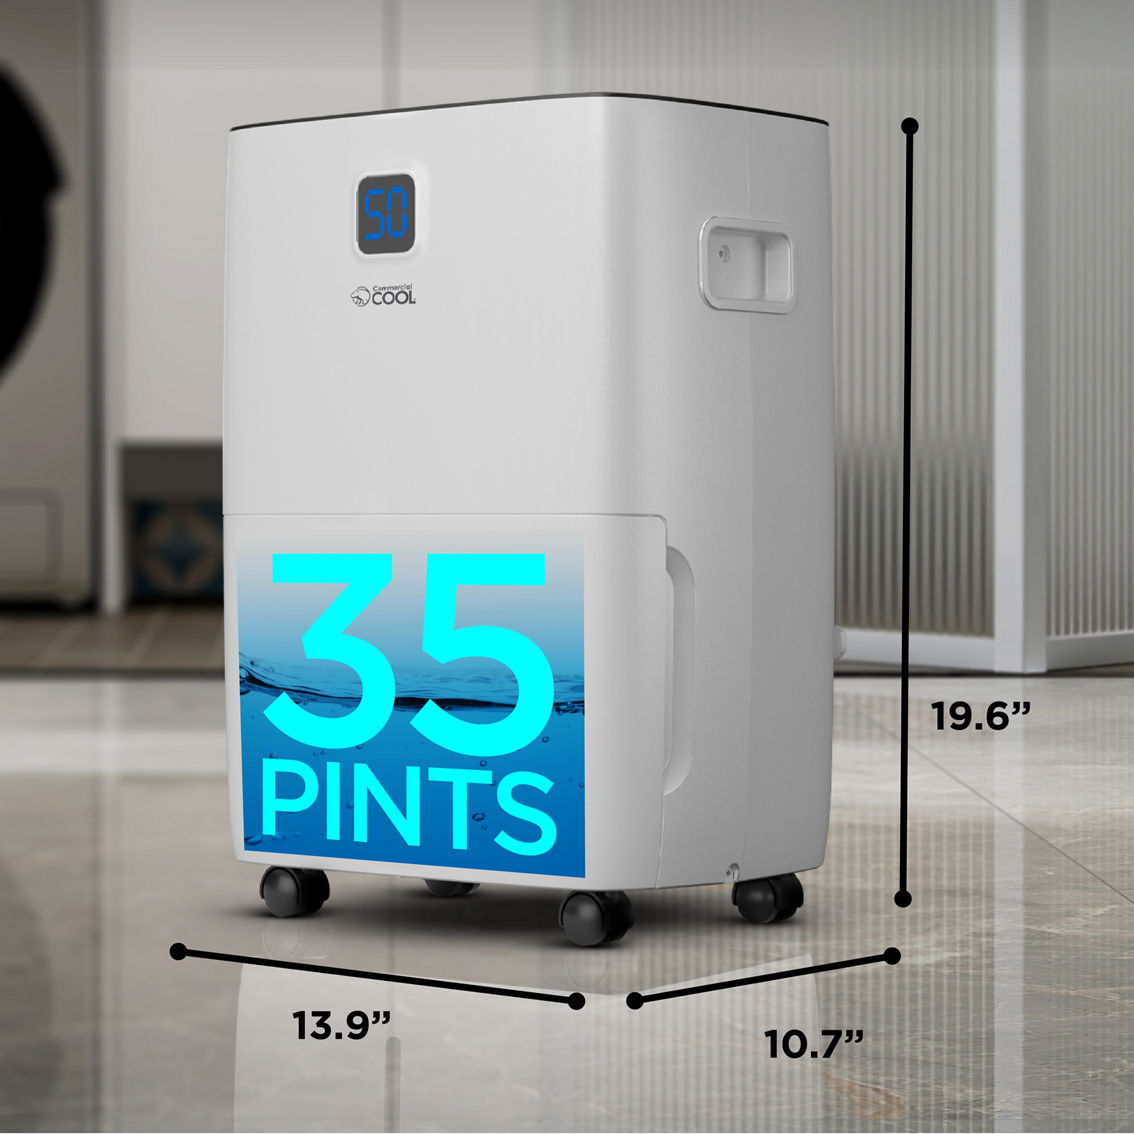 Commercial Cool 35 pint Portable Dehumidifier - Image 6 of 7